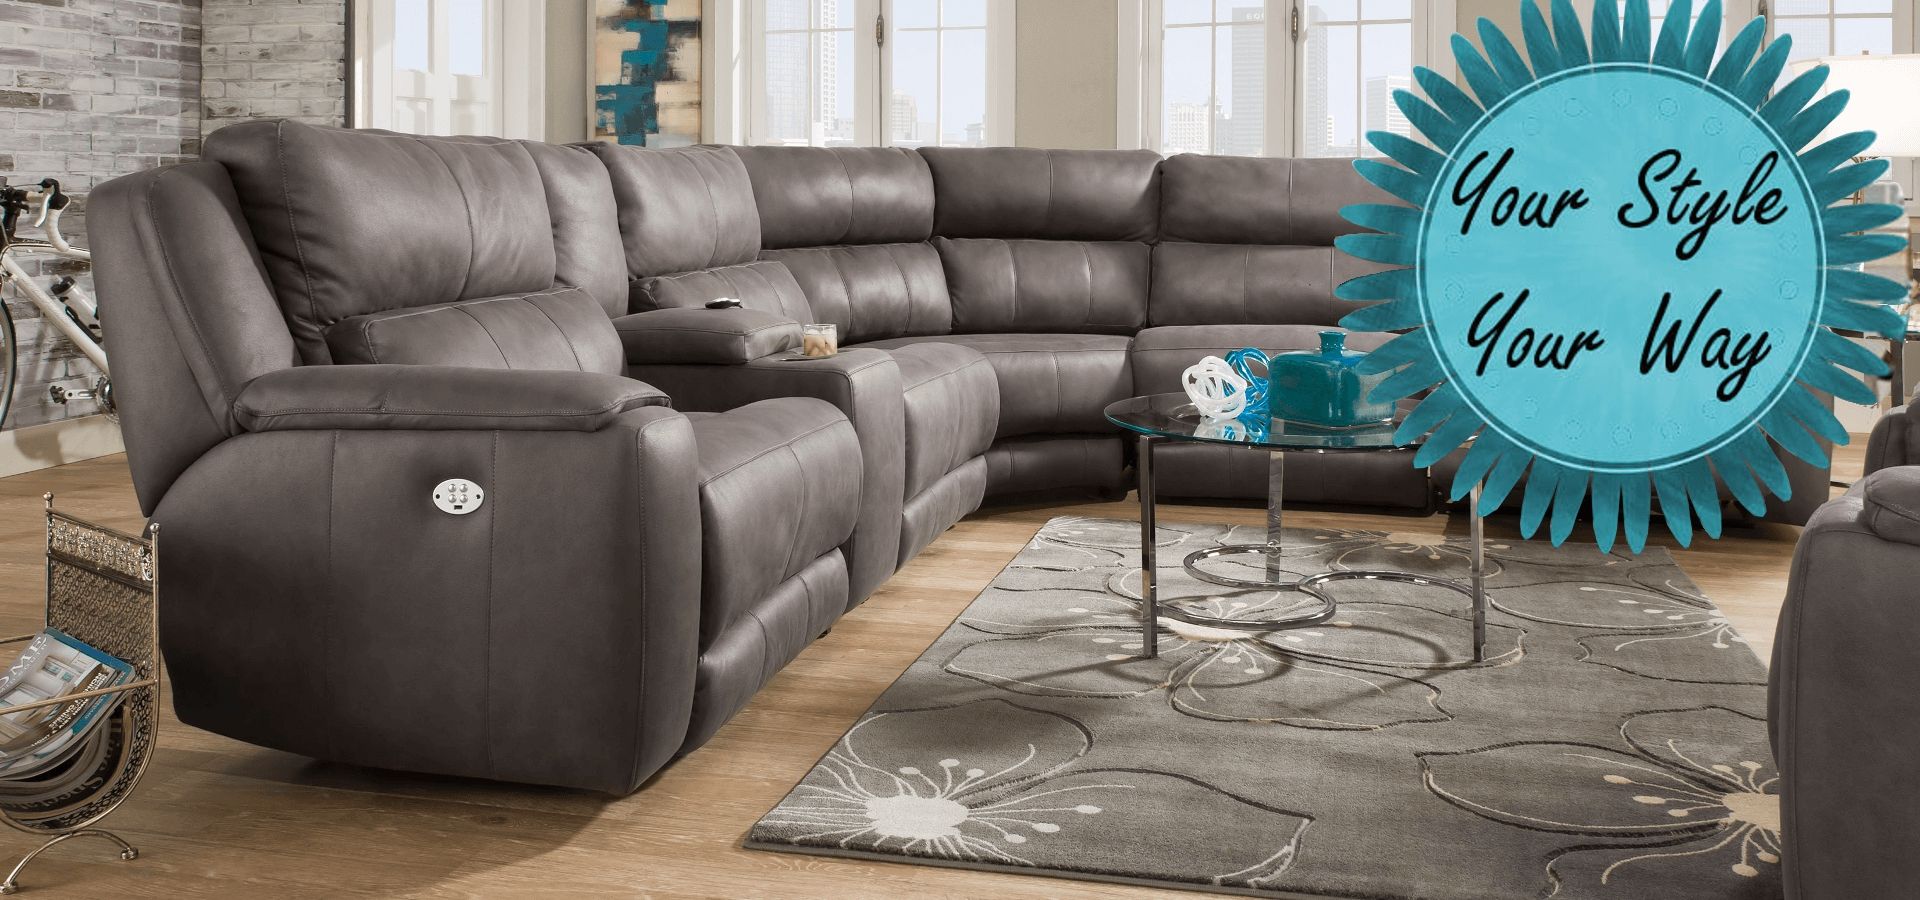 American Made Motion Furniture & Reclining Living Room Sets Intended For Travis Cognac Leather 6 Piece Power Reclining Sectionals With Power Headrest & Usb (View 7 of 25)